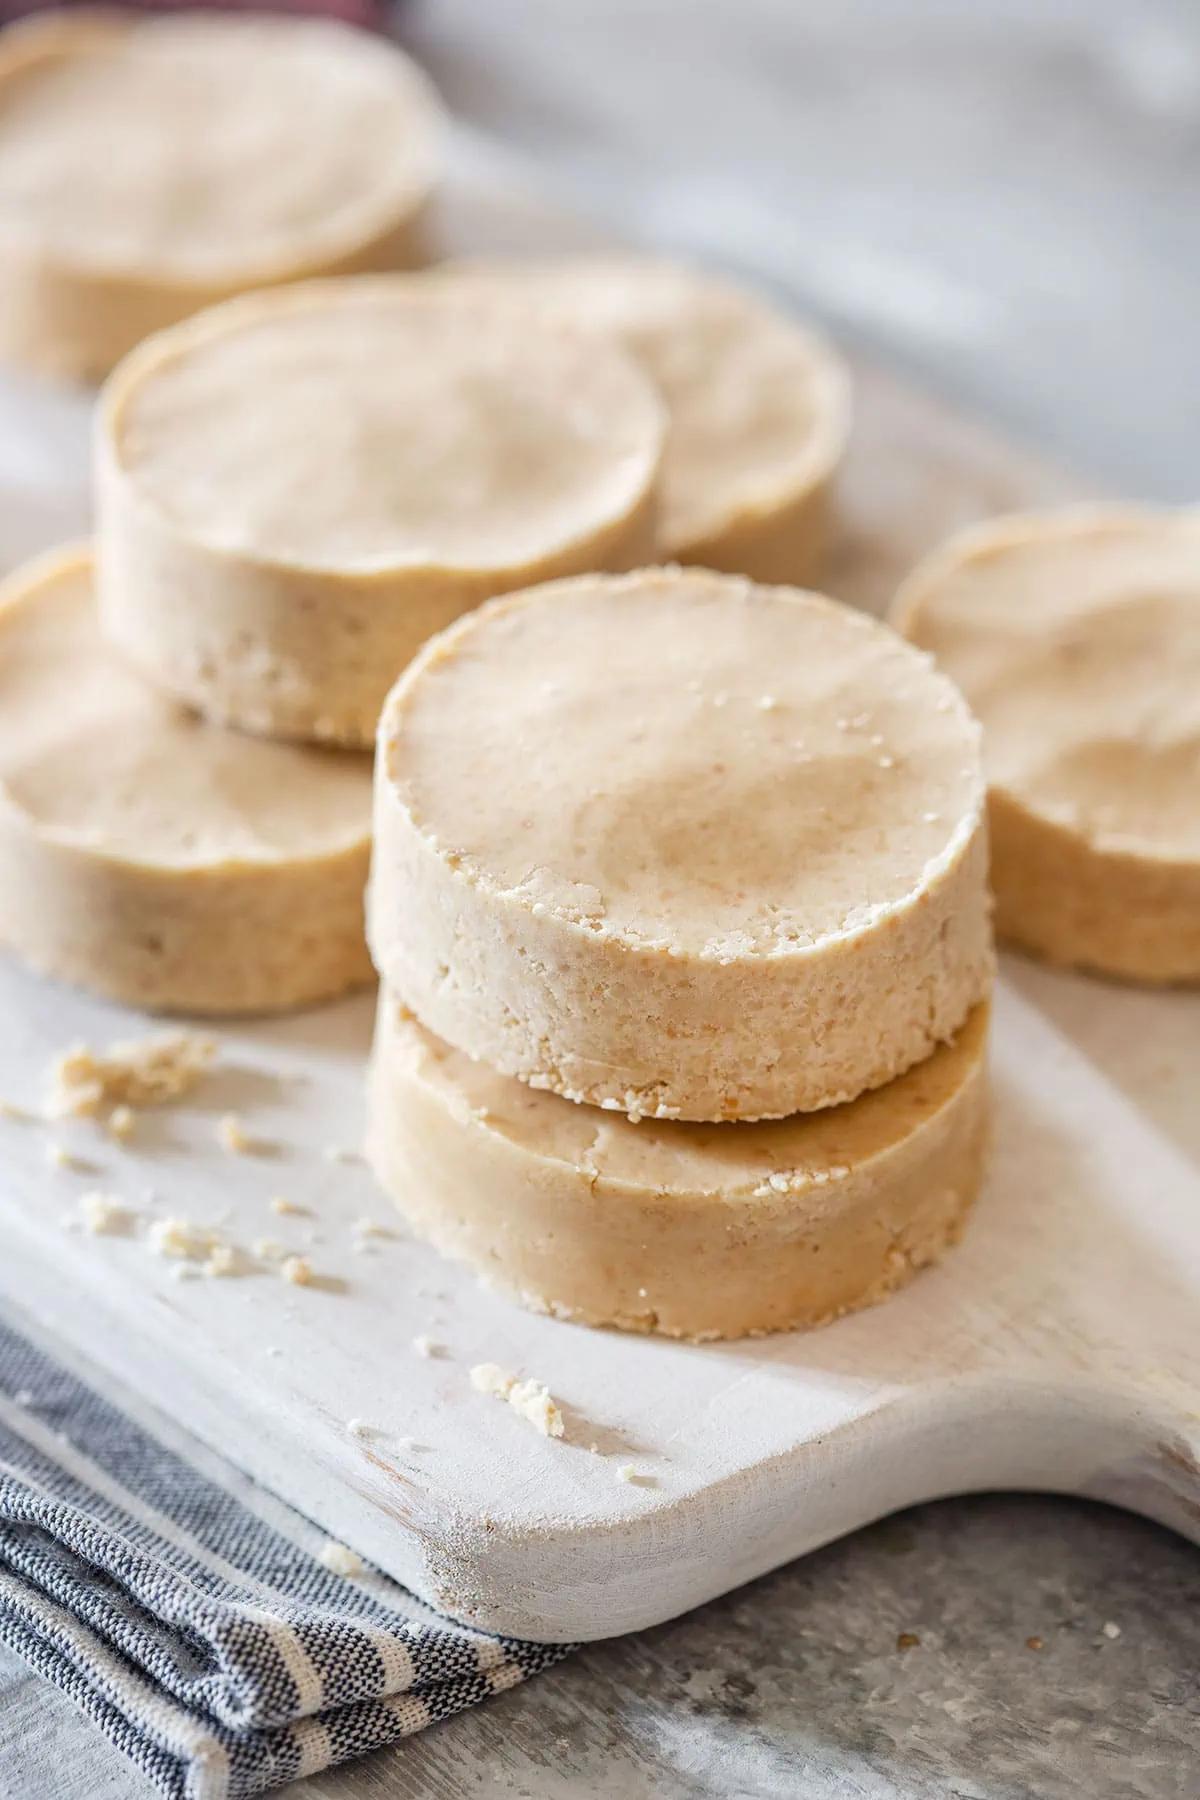 <p>Mazapan is a crumbly, sweet, and delicious Mexican candy made with toasted peanuts and powdered sugar. The recipe is super easy to make at home and it makes the perfect gift for peanut lovers or anyone with a sweet tooth!</p><p><strong>Go to the recipe: <a href="https://www.maricruzavalos.com/mazapan-recipe/">Mazapan</a></strong></p>